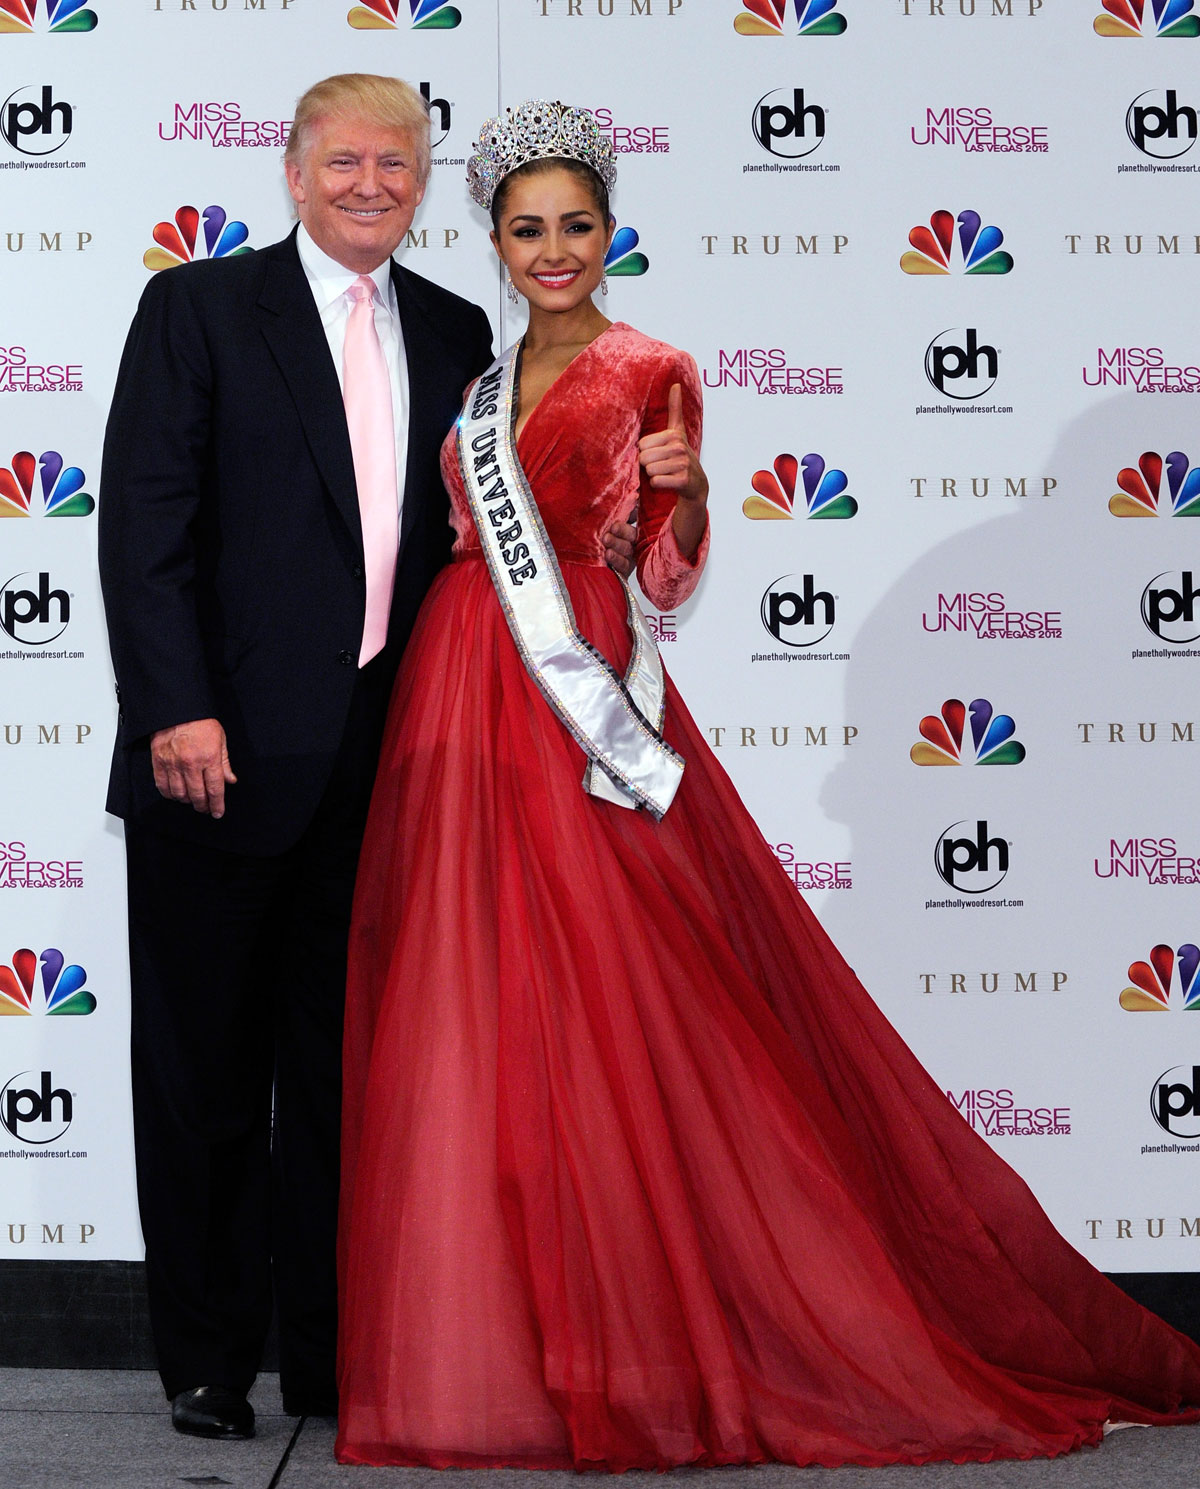 OLIVIA-CULPO-as-Miss-Universe-at-the-2012-Miss-Universe-Pageant-in-Las-Vegas-9.jpg